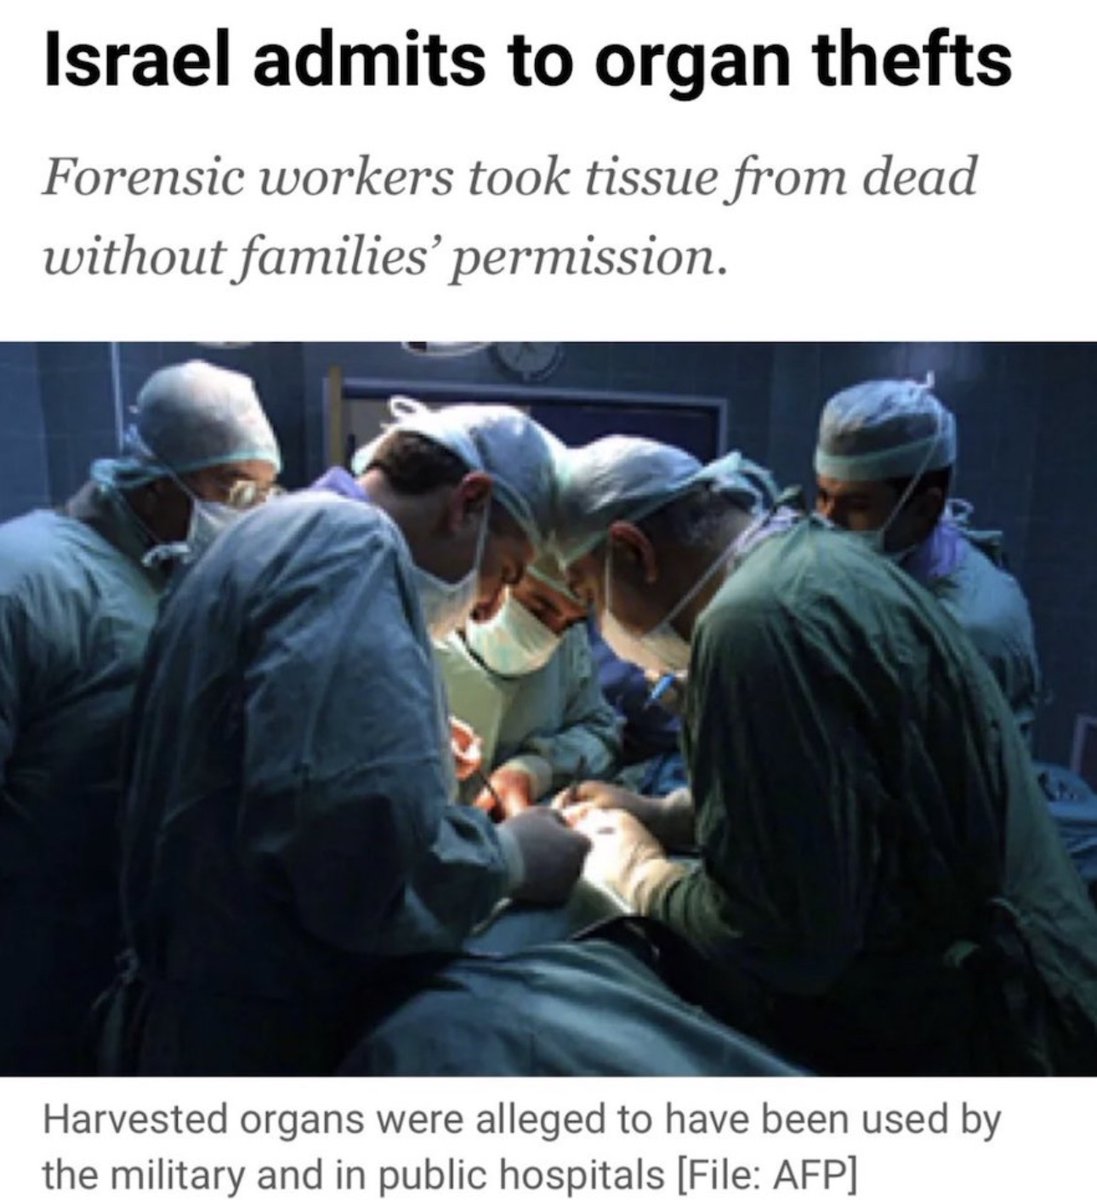 WHY ARE THEY STEALING ORGANS?